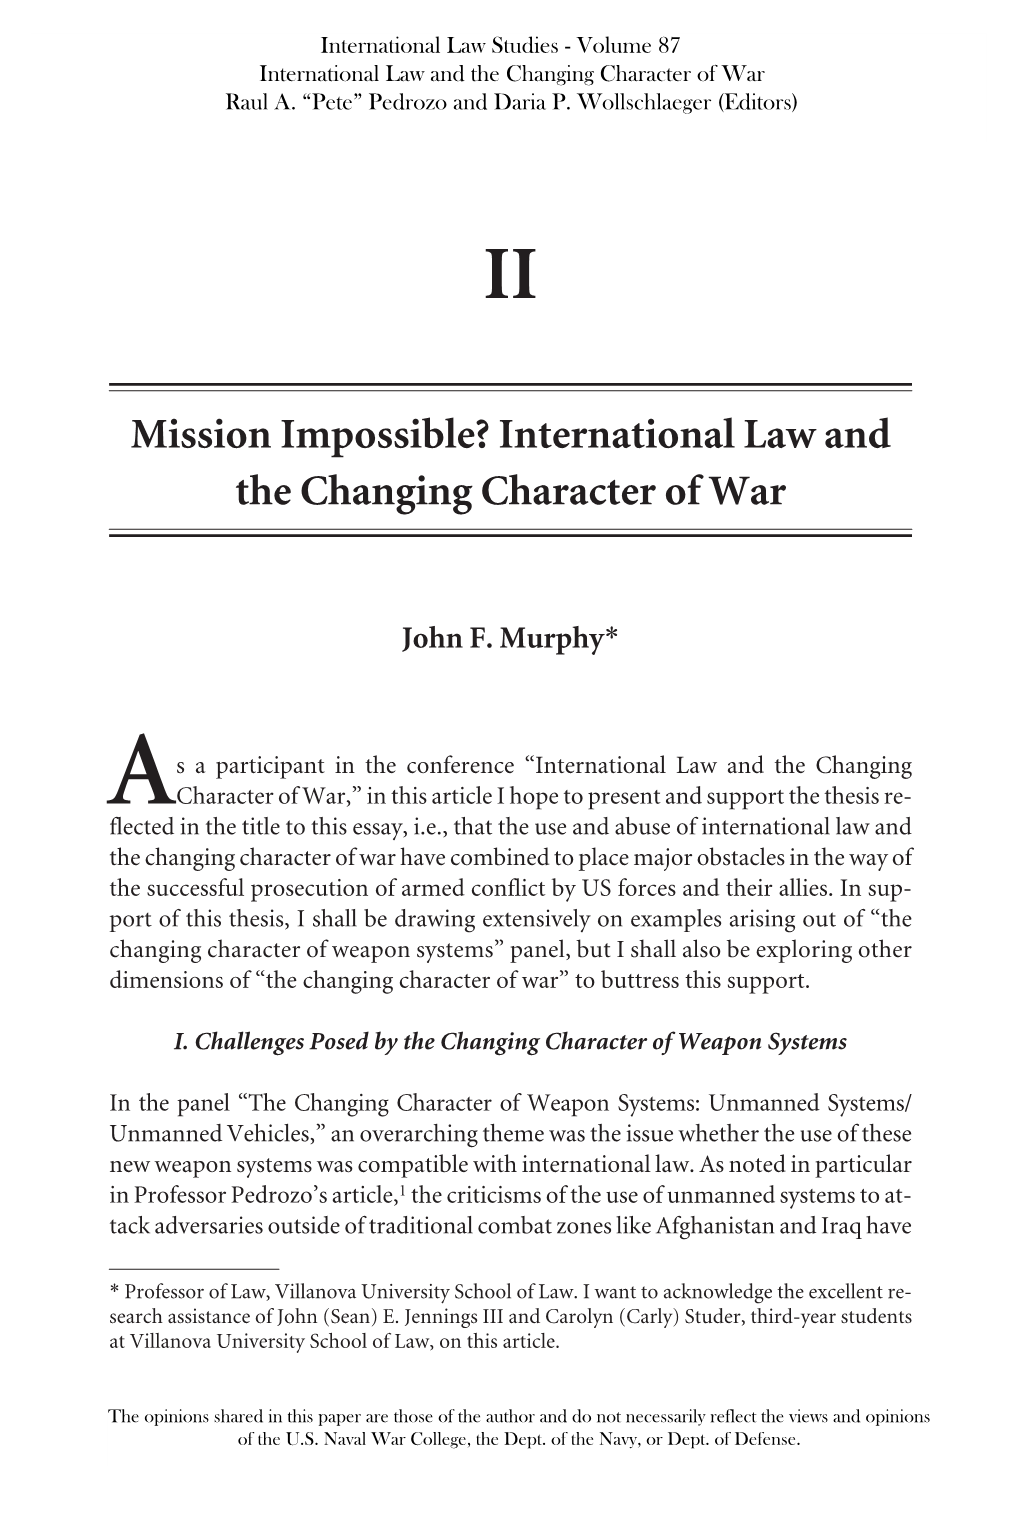 Mission Impossible? International Law and the Changing Character of War